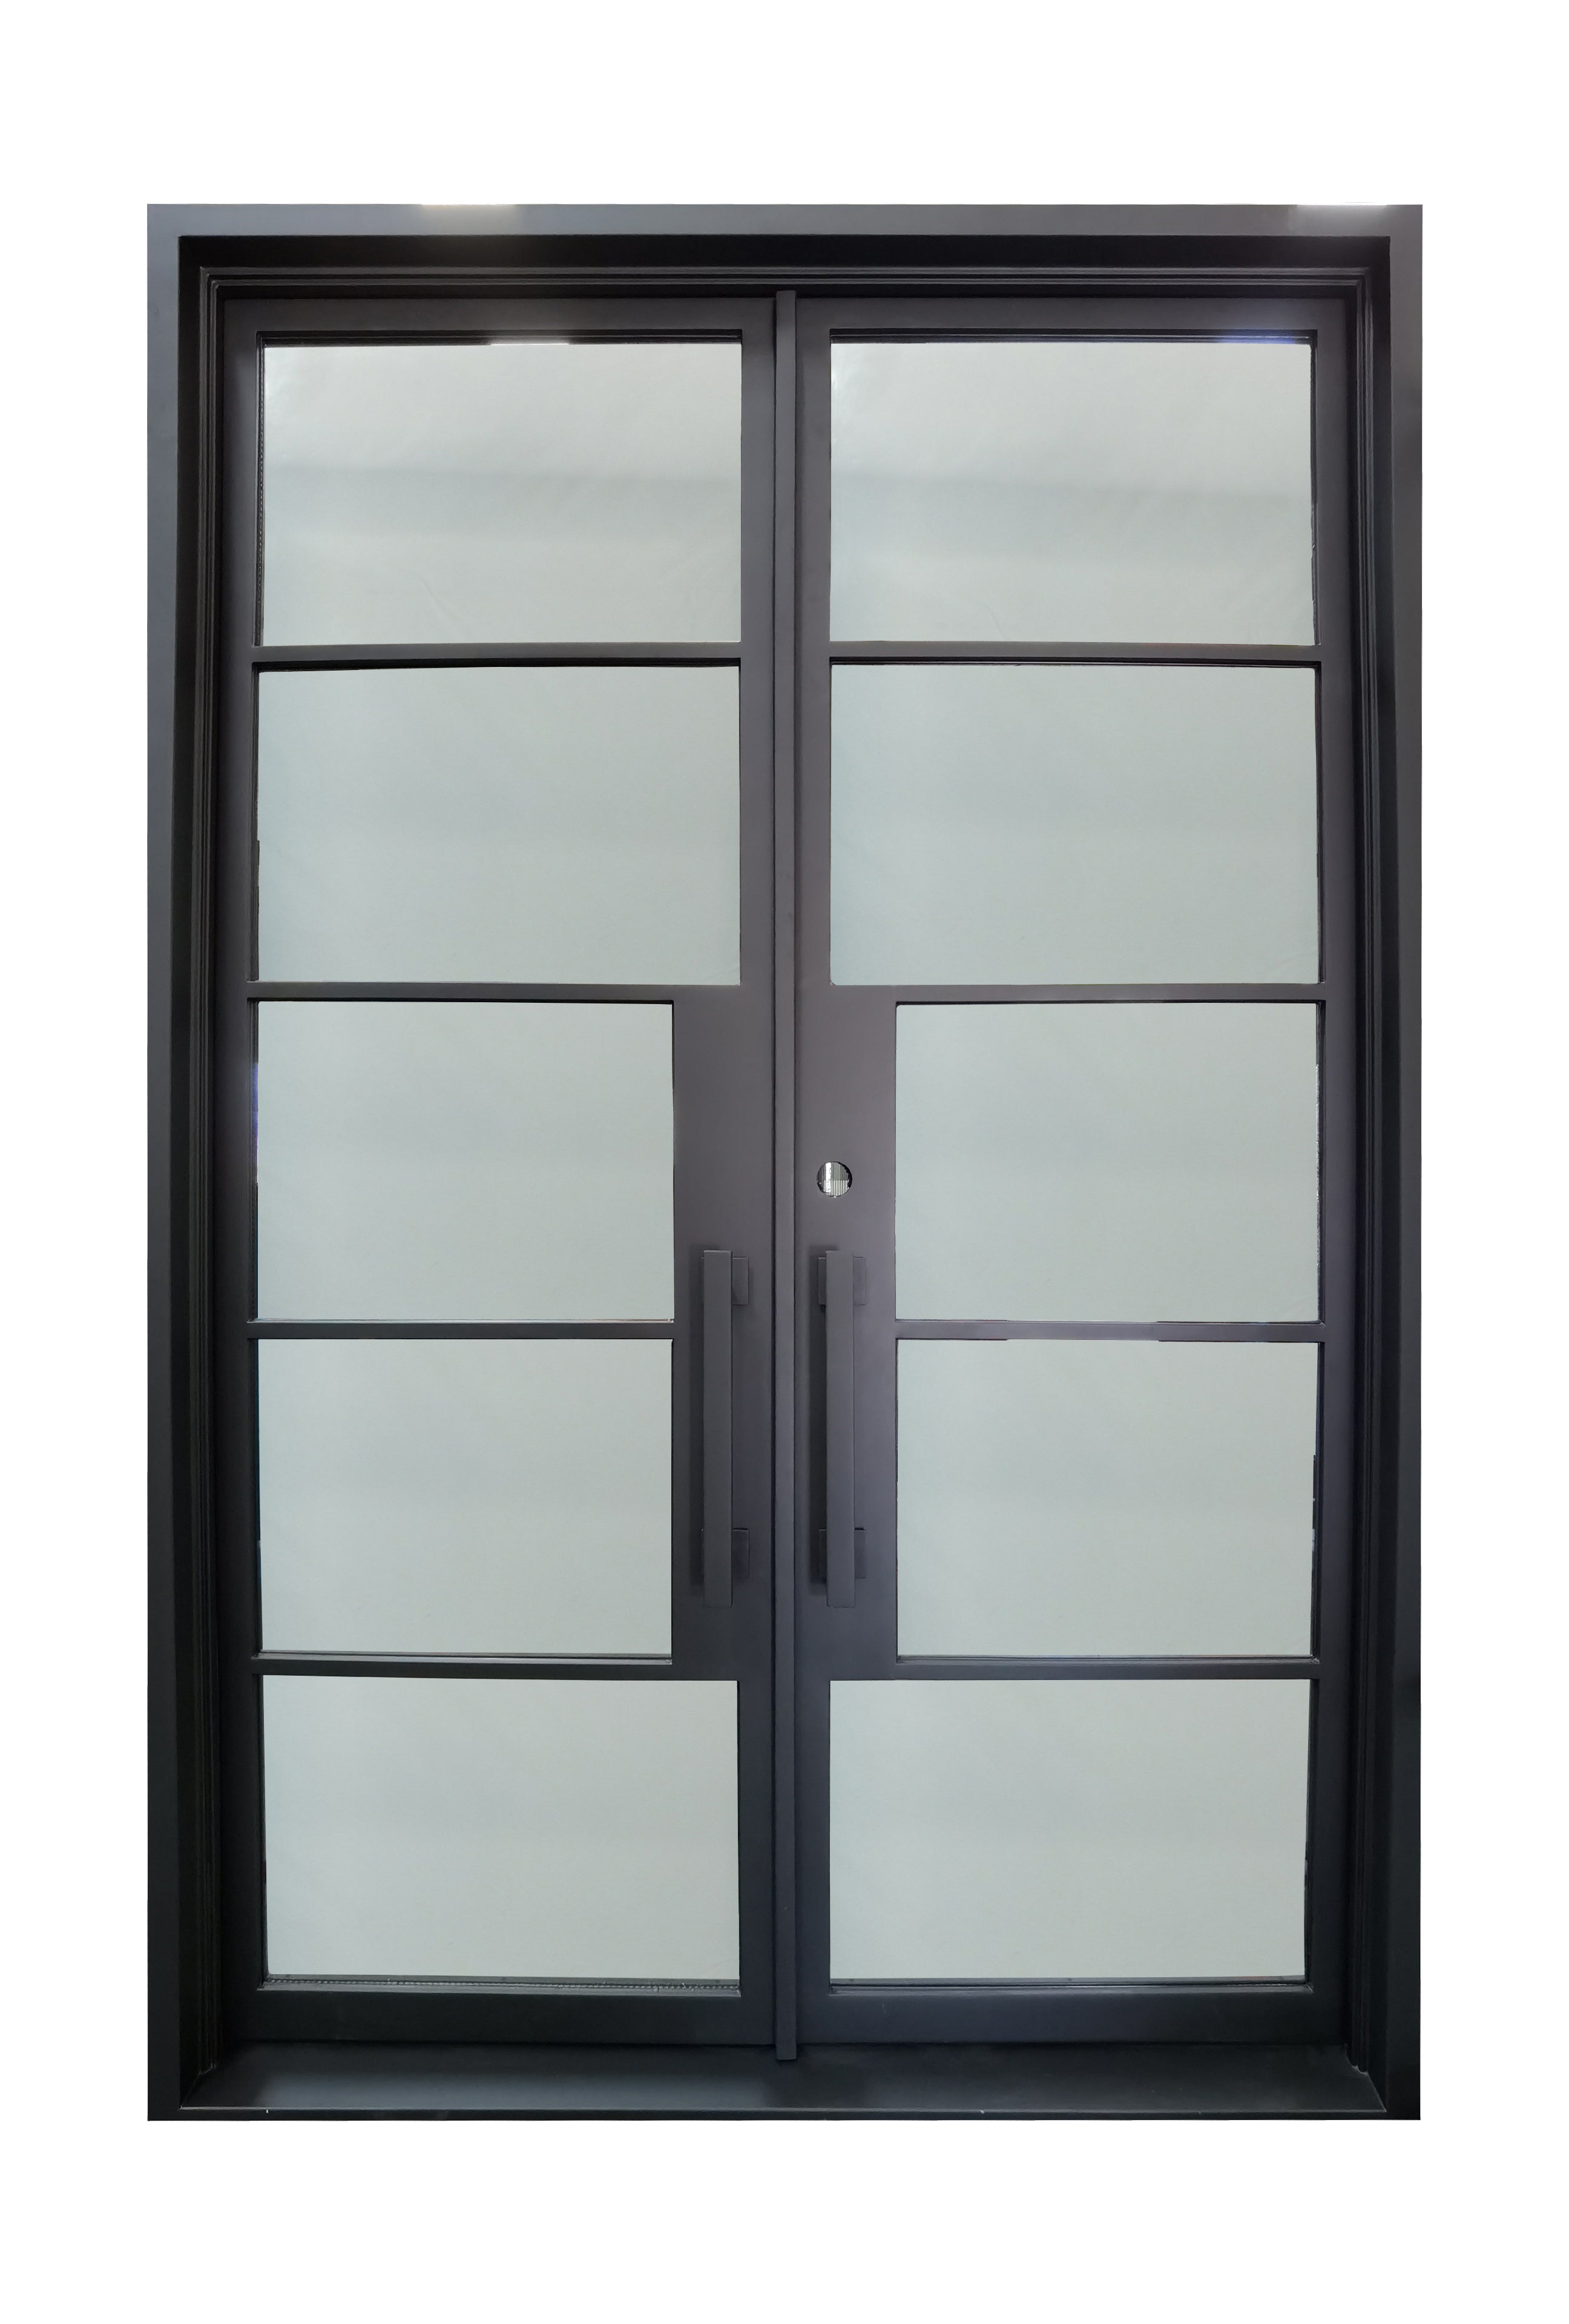 Frisco Model Double Front Entry Iron Door With Tempered Clear Low E Glass Matt Black Finish